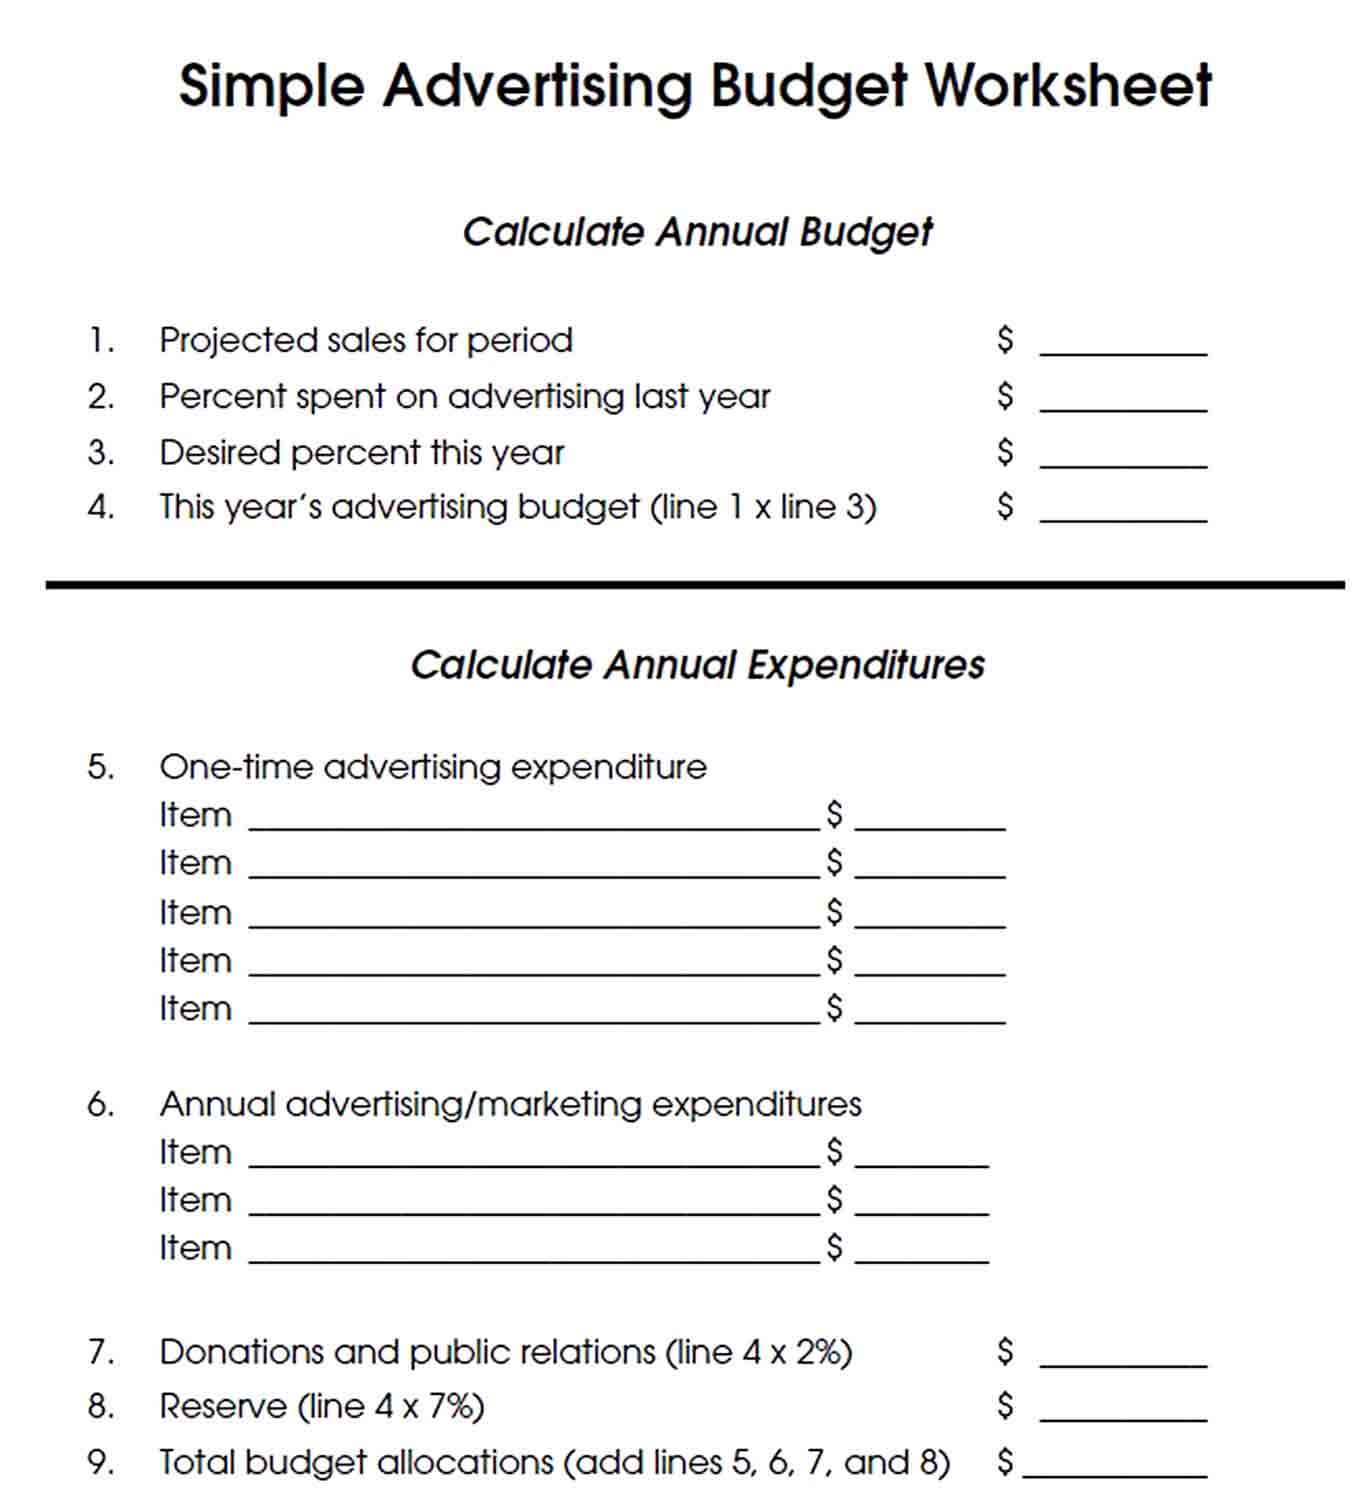 Budget for Small Business Advertising